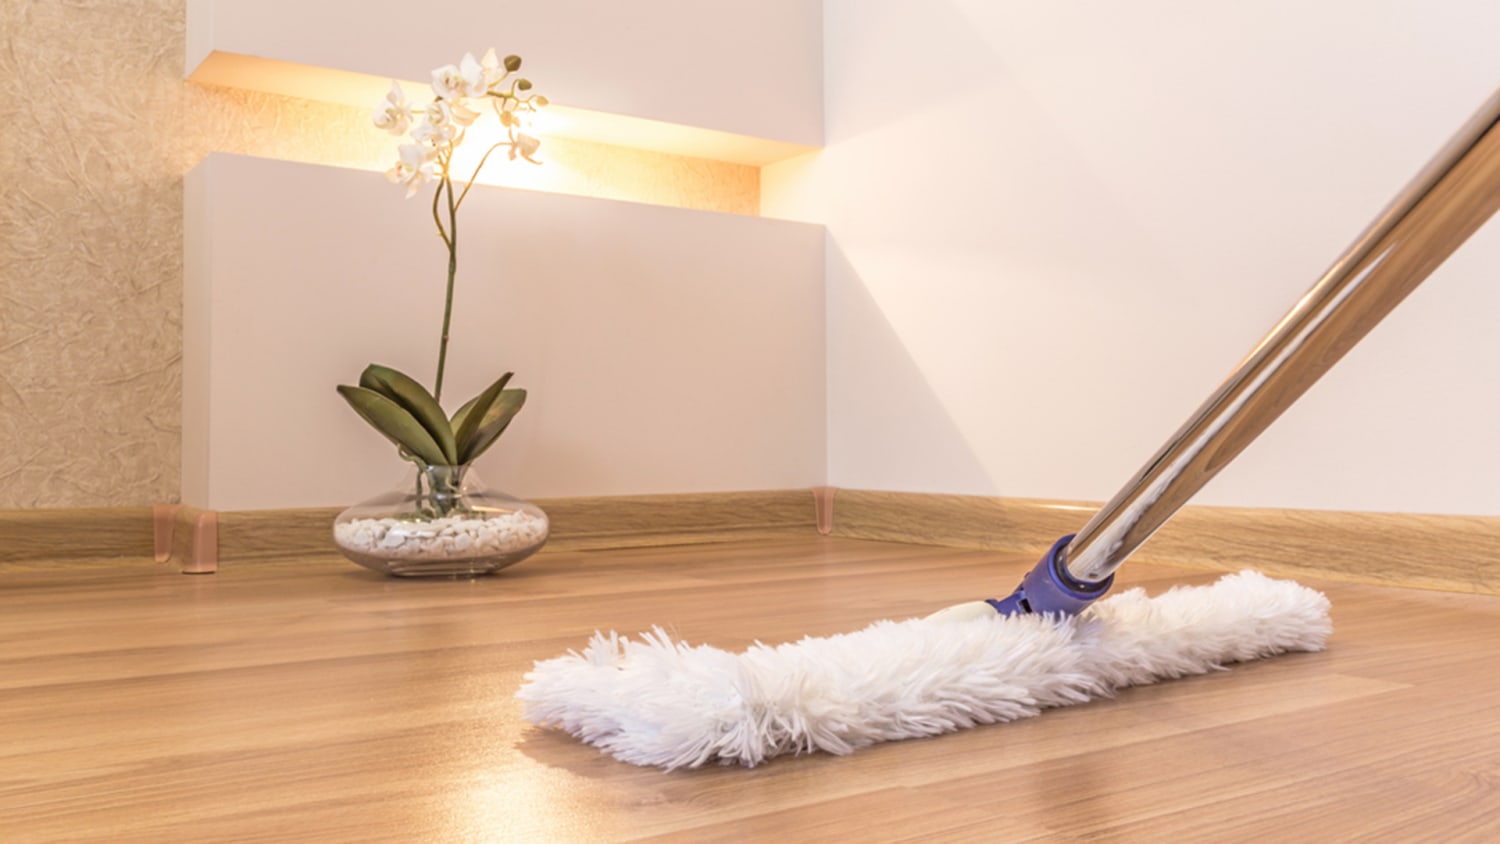 How To Clean Hardwood Floors The Right Way, Best Mop And Cleaner For Hardwood Floors